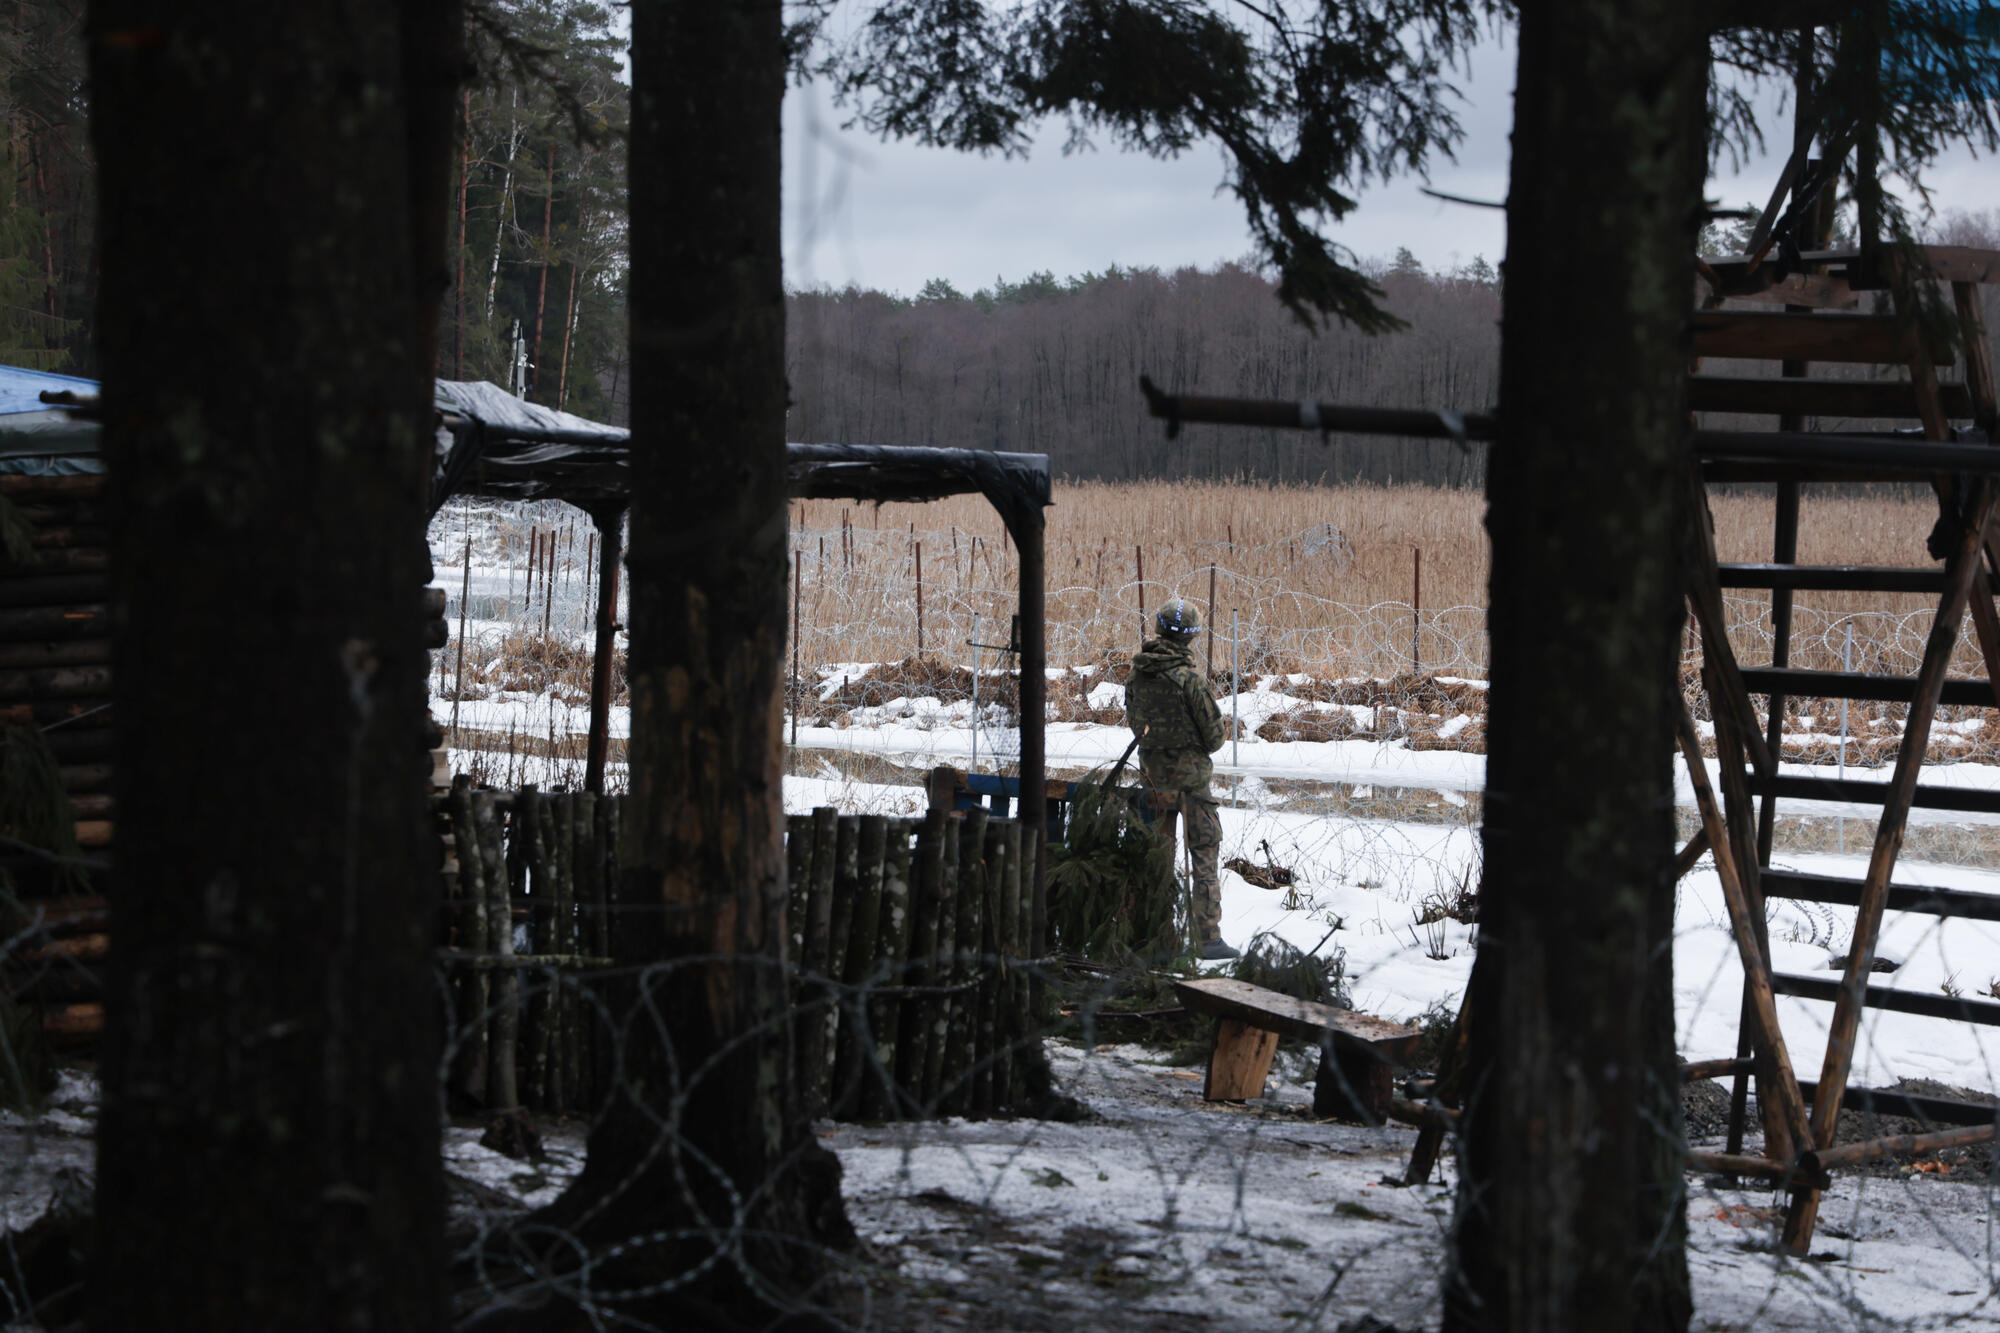 A Polish soldier in his camp, between an observation pulpit and a wooden hut. © Jakub Jasiukiewicz/MSF